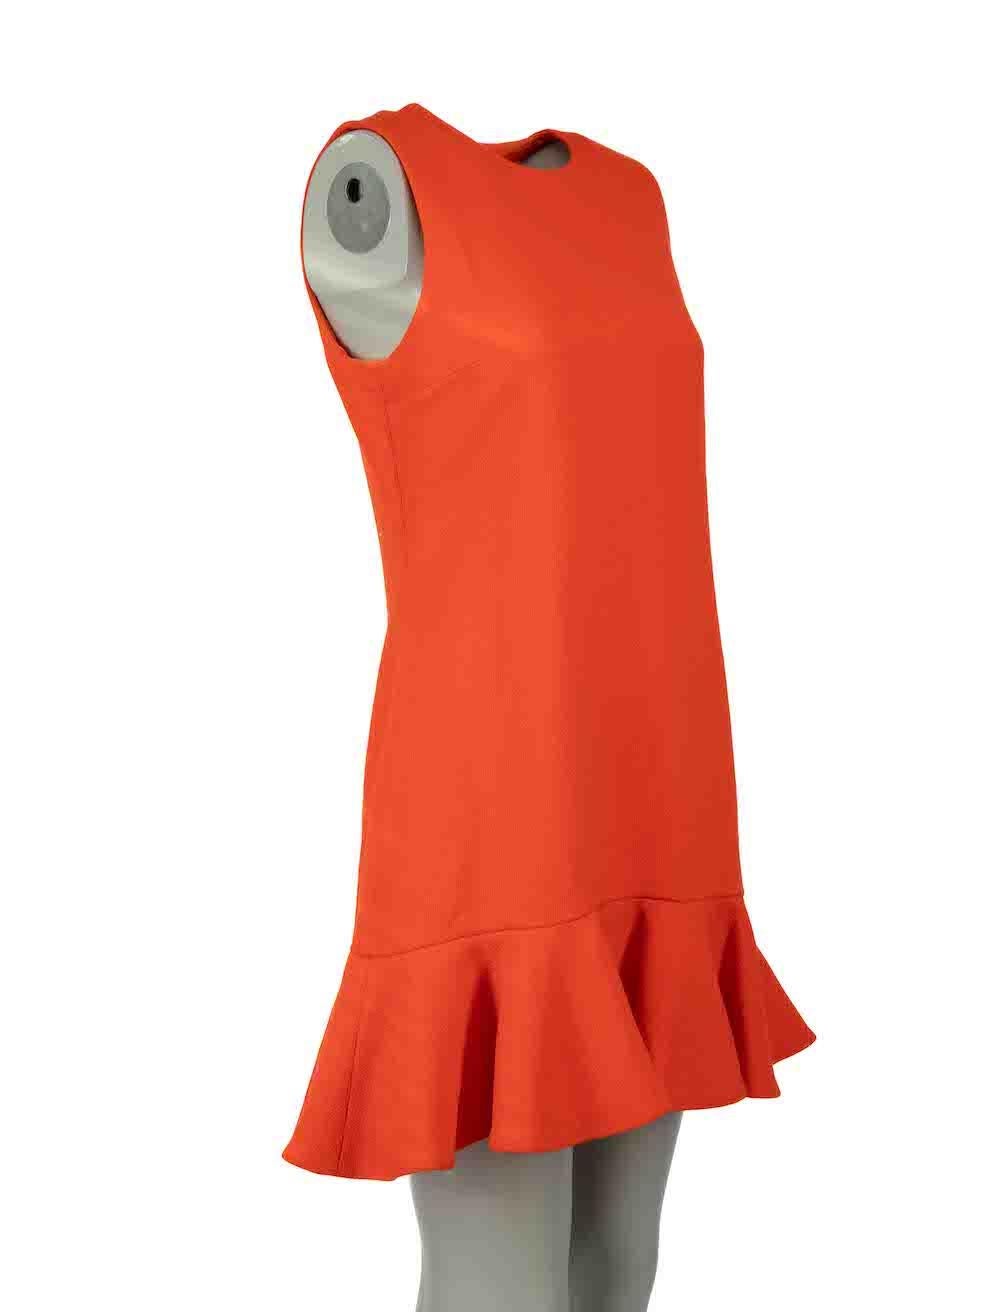 CONDITION is Very good. Minimal wear to dress is evident. Minimal wear to fabric composition with one or two small plucks to the weave found on this used Victoria Victoria Beckham designer resale item.
 
Details
Orange
Wool
Mini dress
Dropped